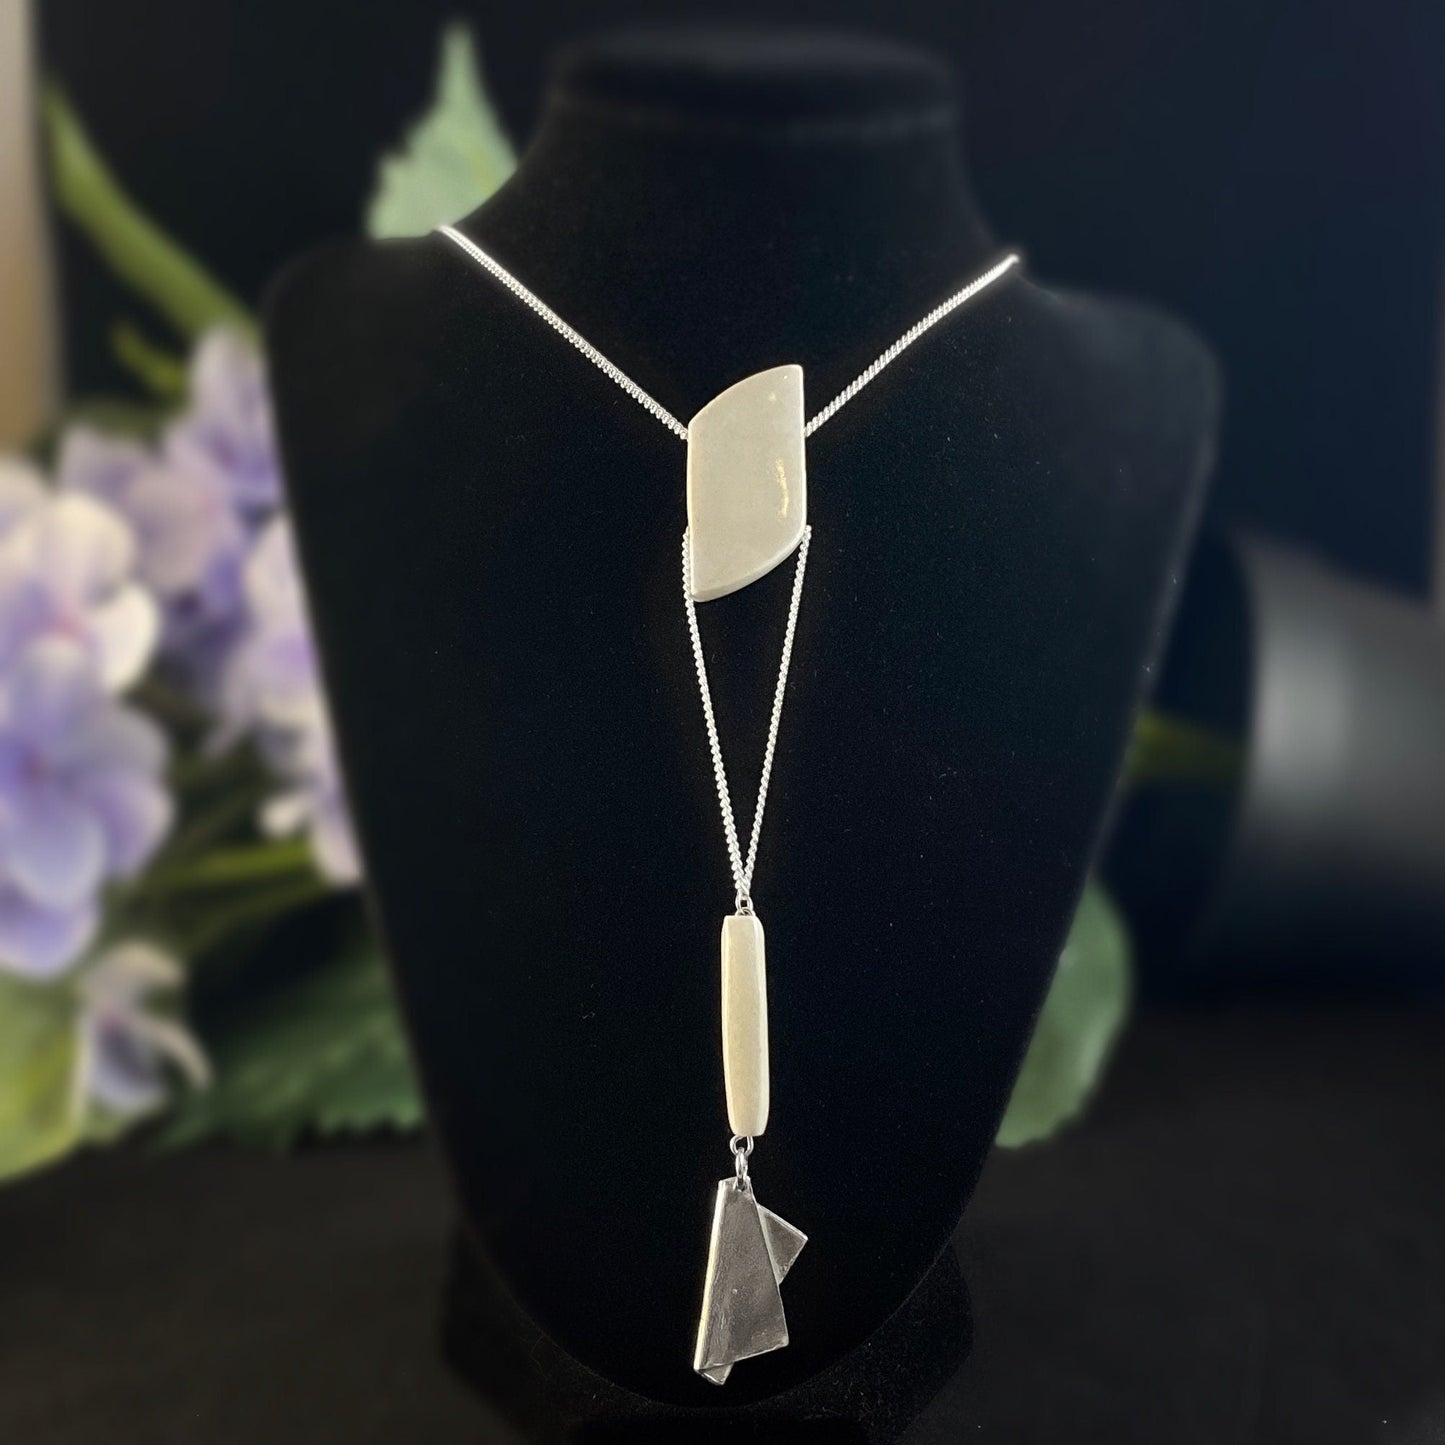 Silver Triangle and White Geometric Bead Pendant Necklace - Handmade in Canada, Anne-Marie Chagnon Jewelry